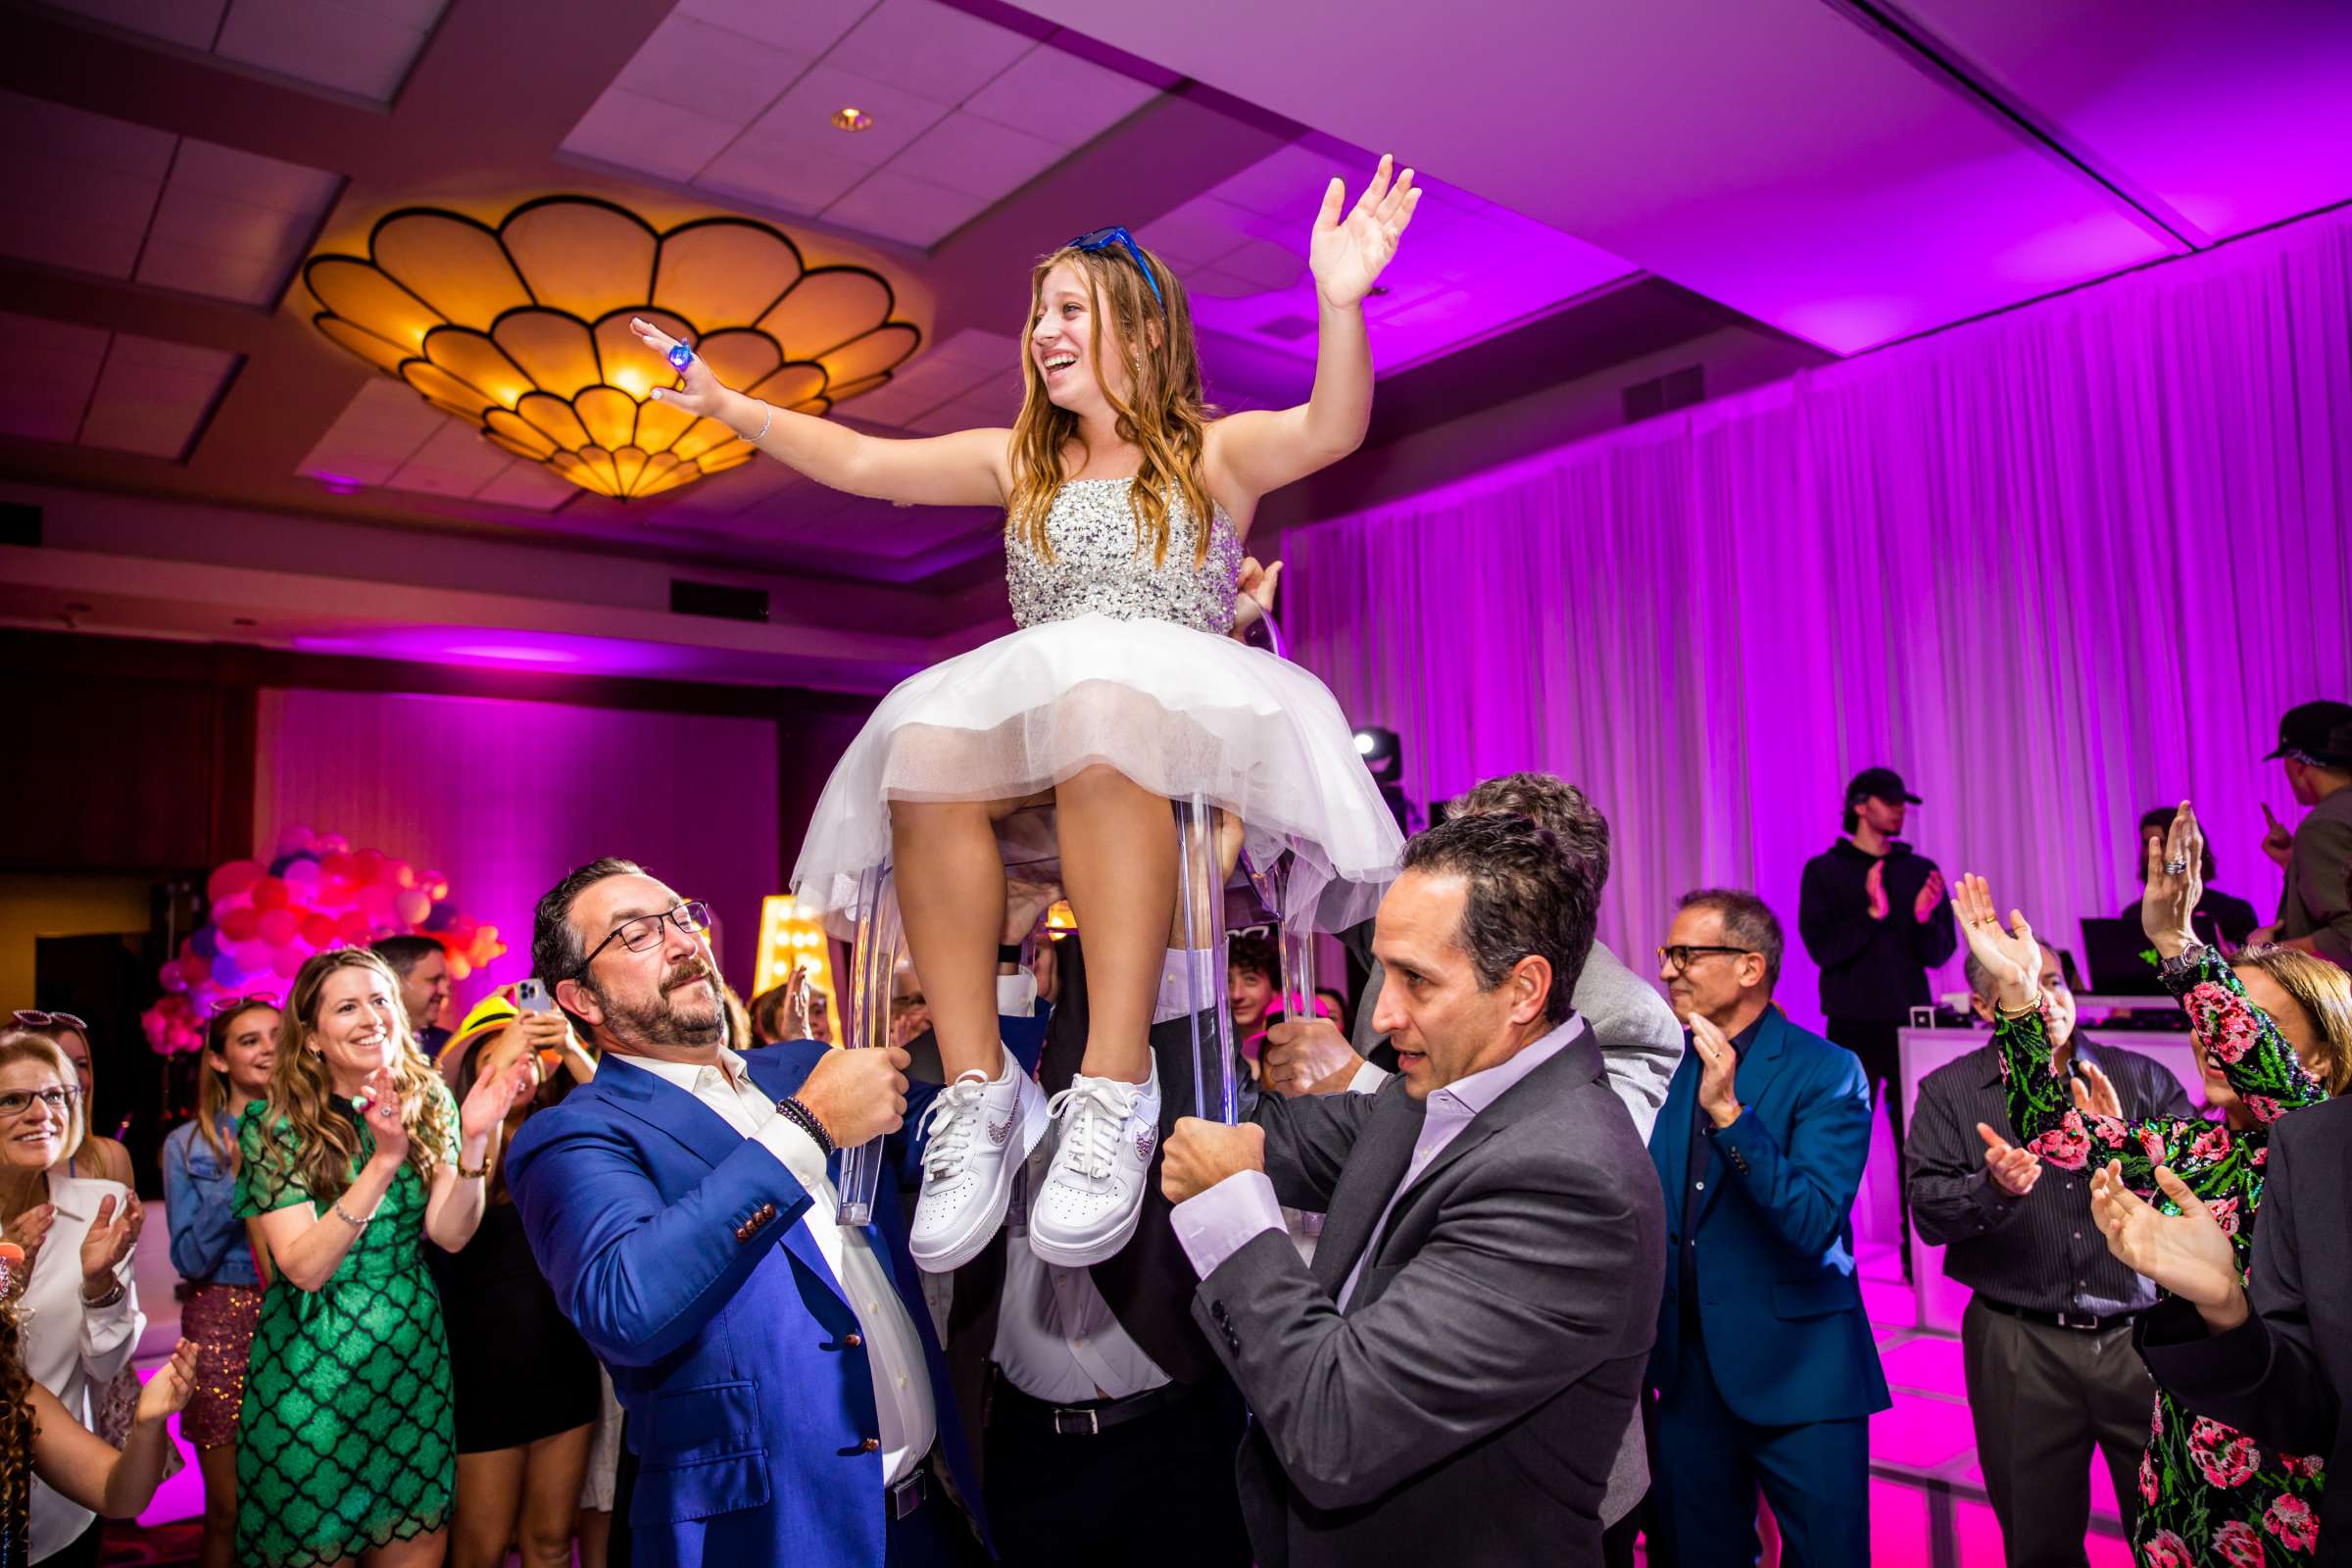 Mitzvah coordinated by RSVP Events, Heather H Mitzvah Photo #4 by True Photography